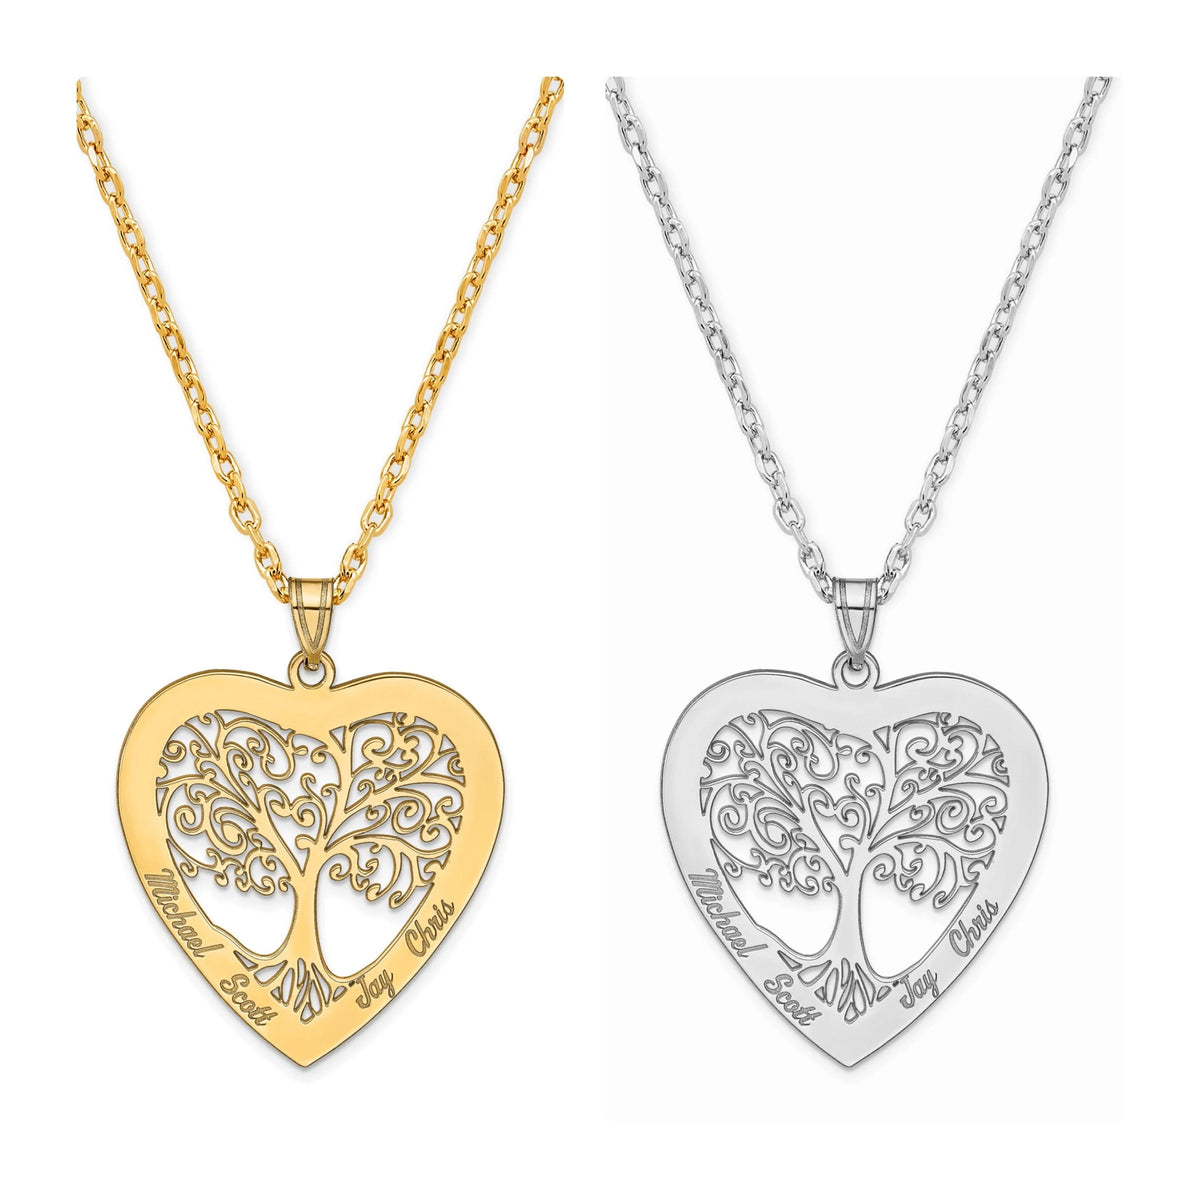 Personalized Heart Family Tree Pendant with Necklace Up to 4 Names w(MADE IN USA)10k Gold or Silver Gift Box Included